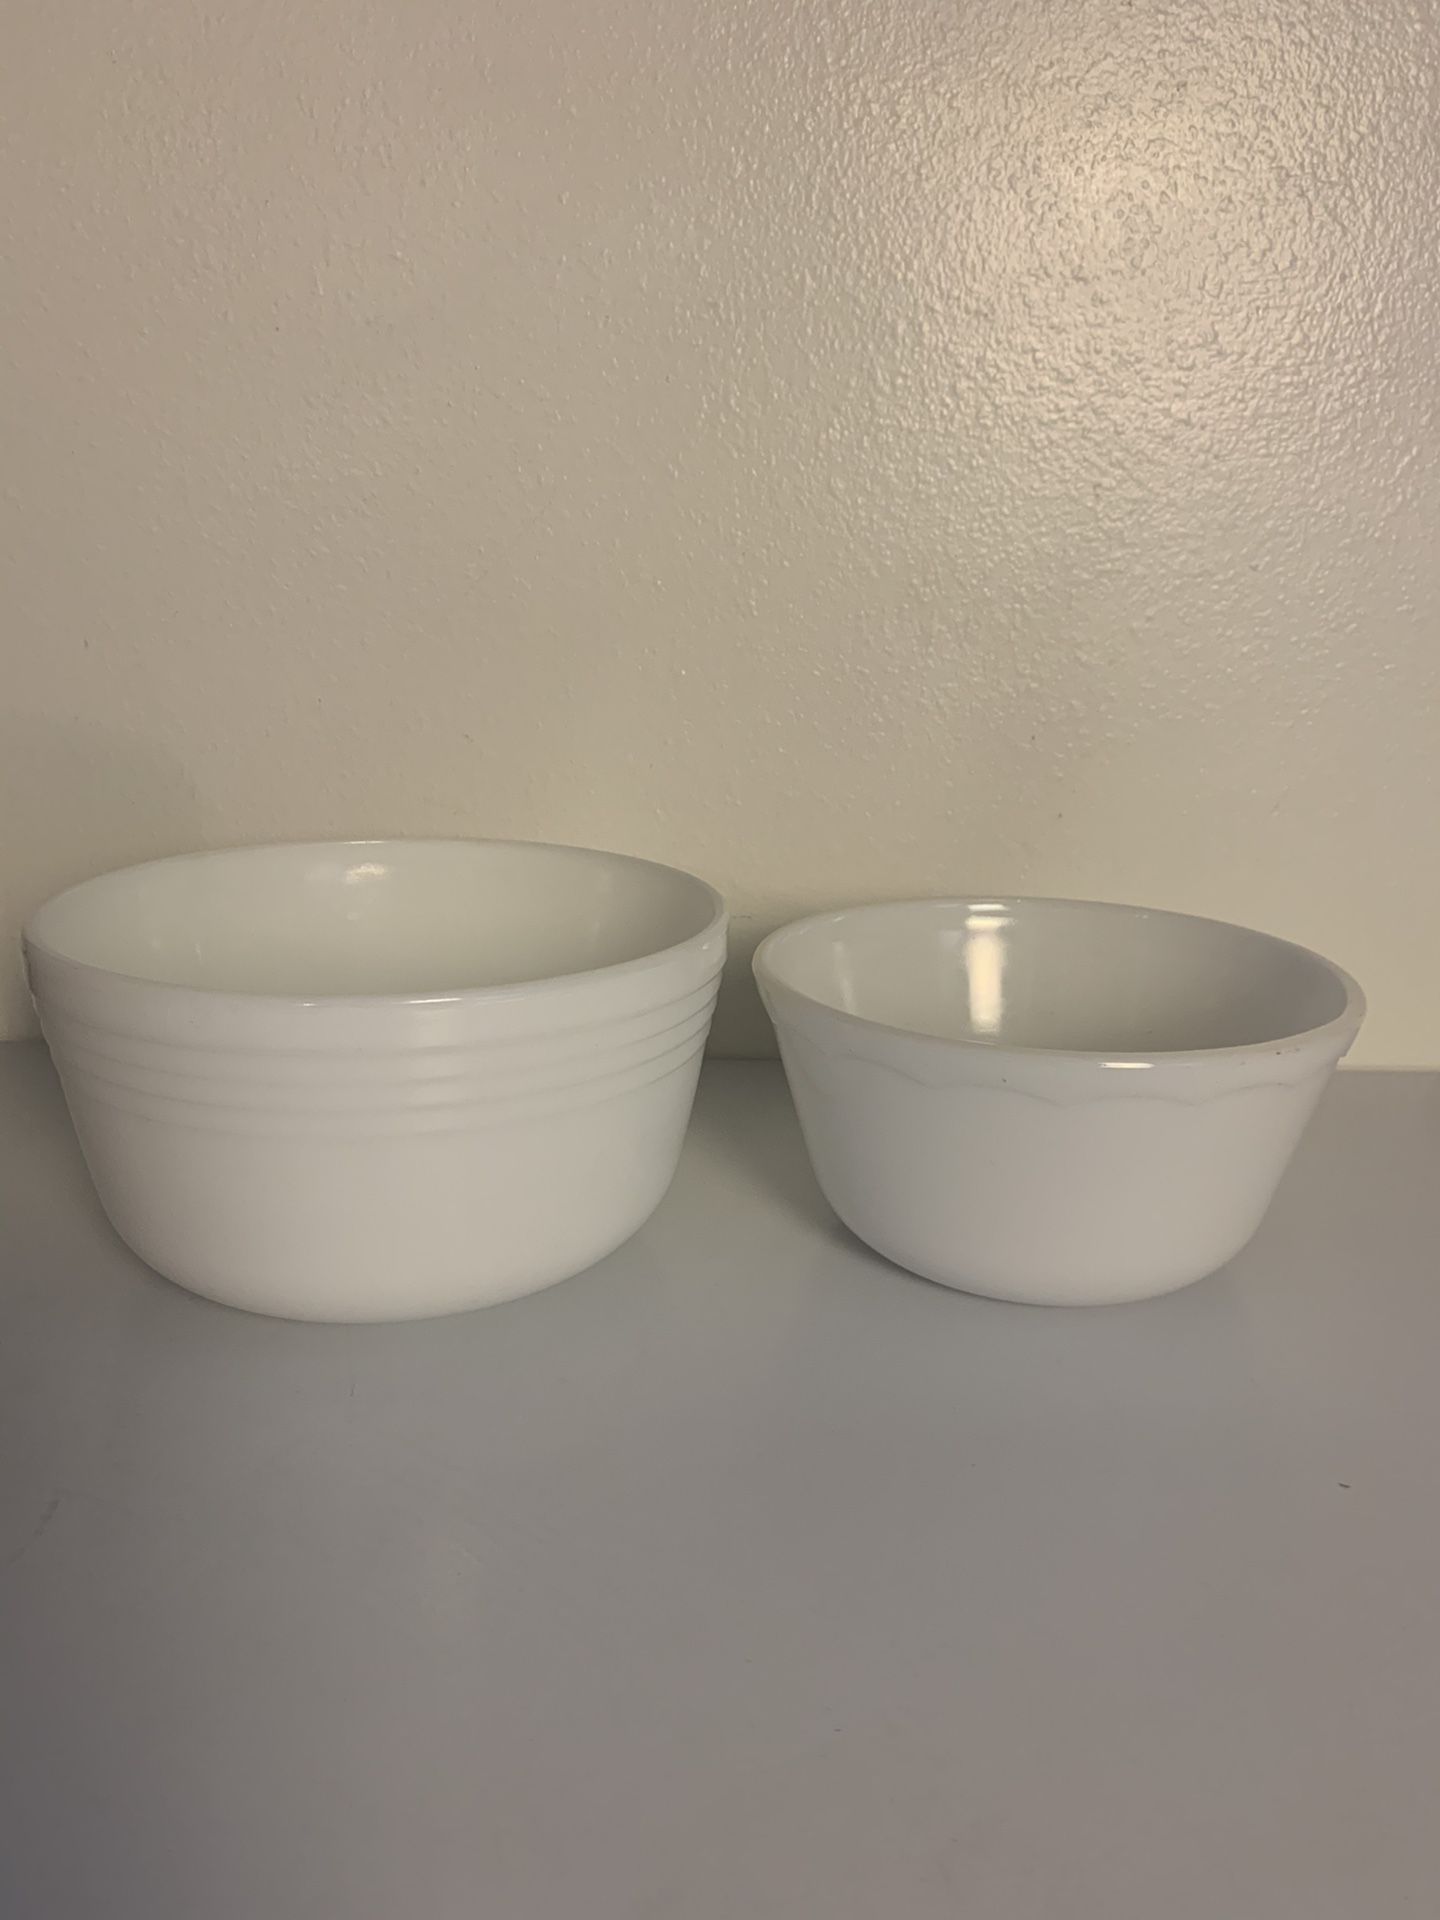 Vintage white Pyrex mixing bowl and another small mixing bowl that is not labeled